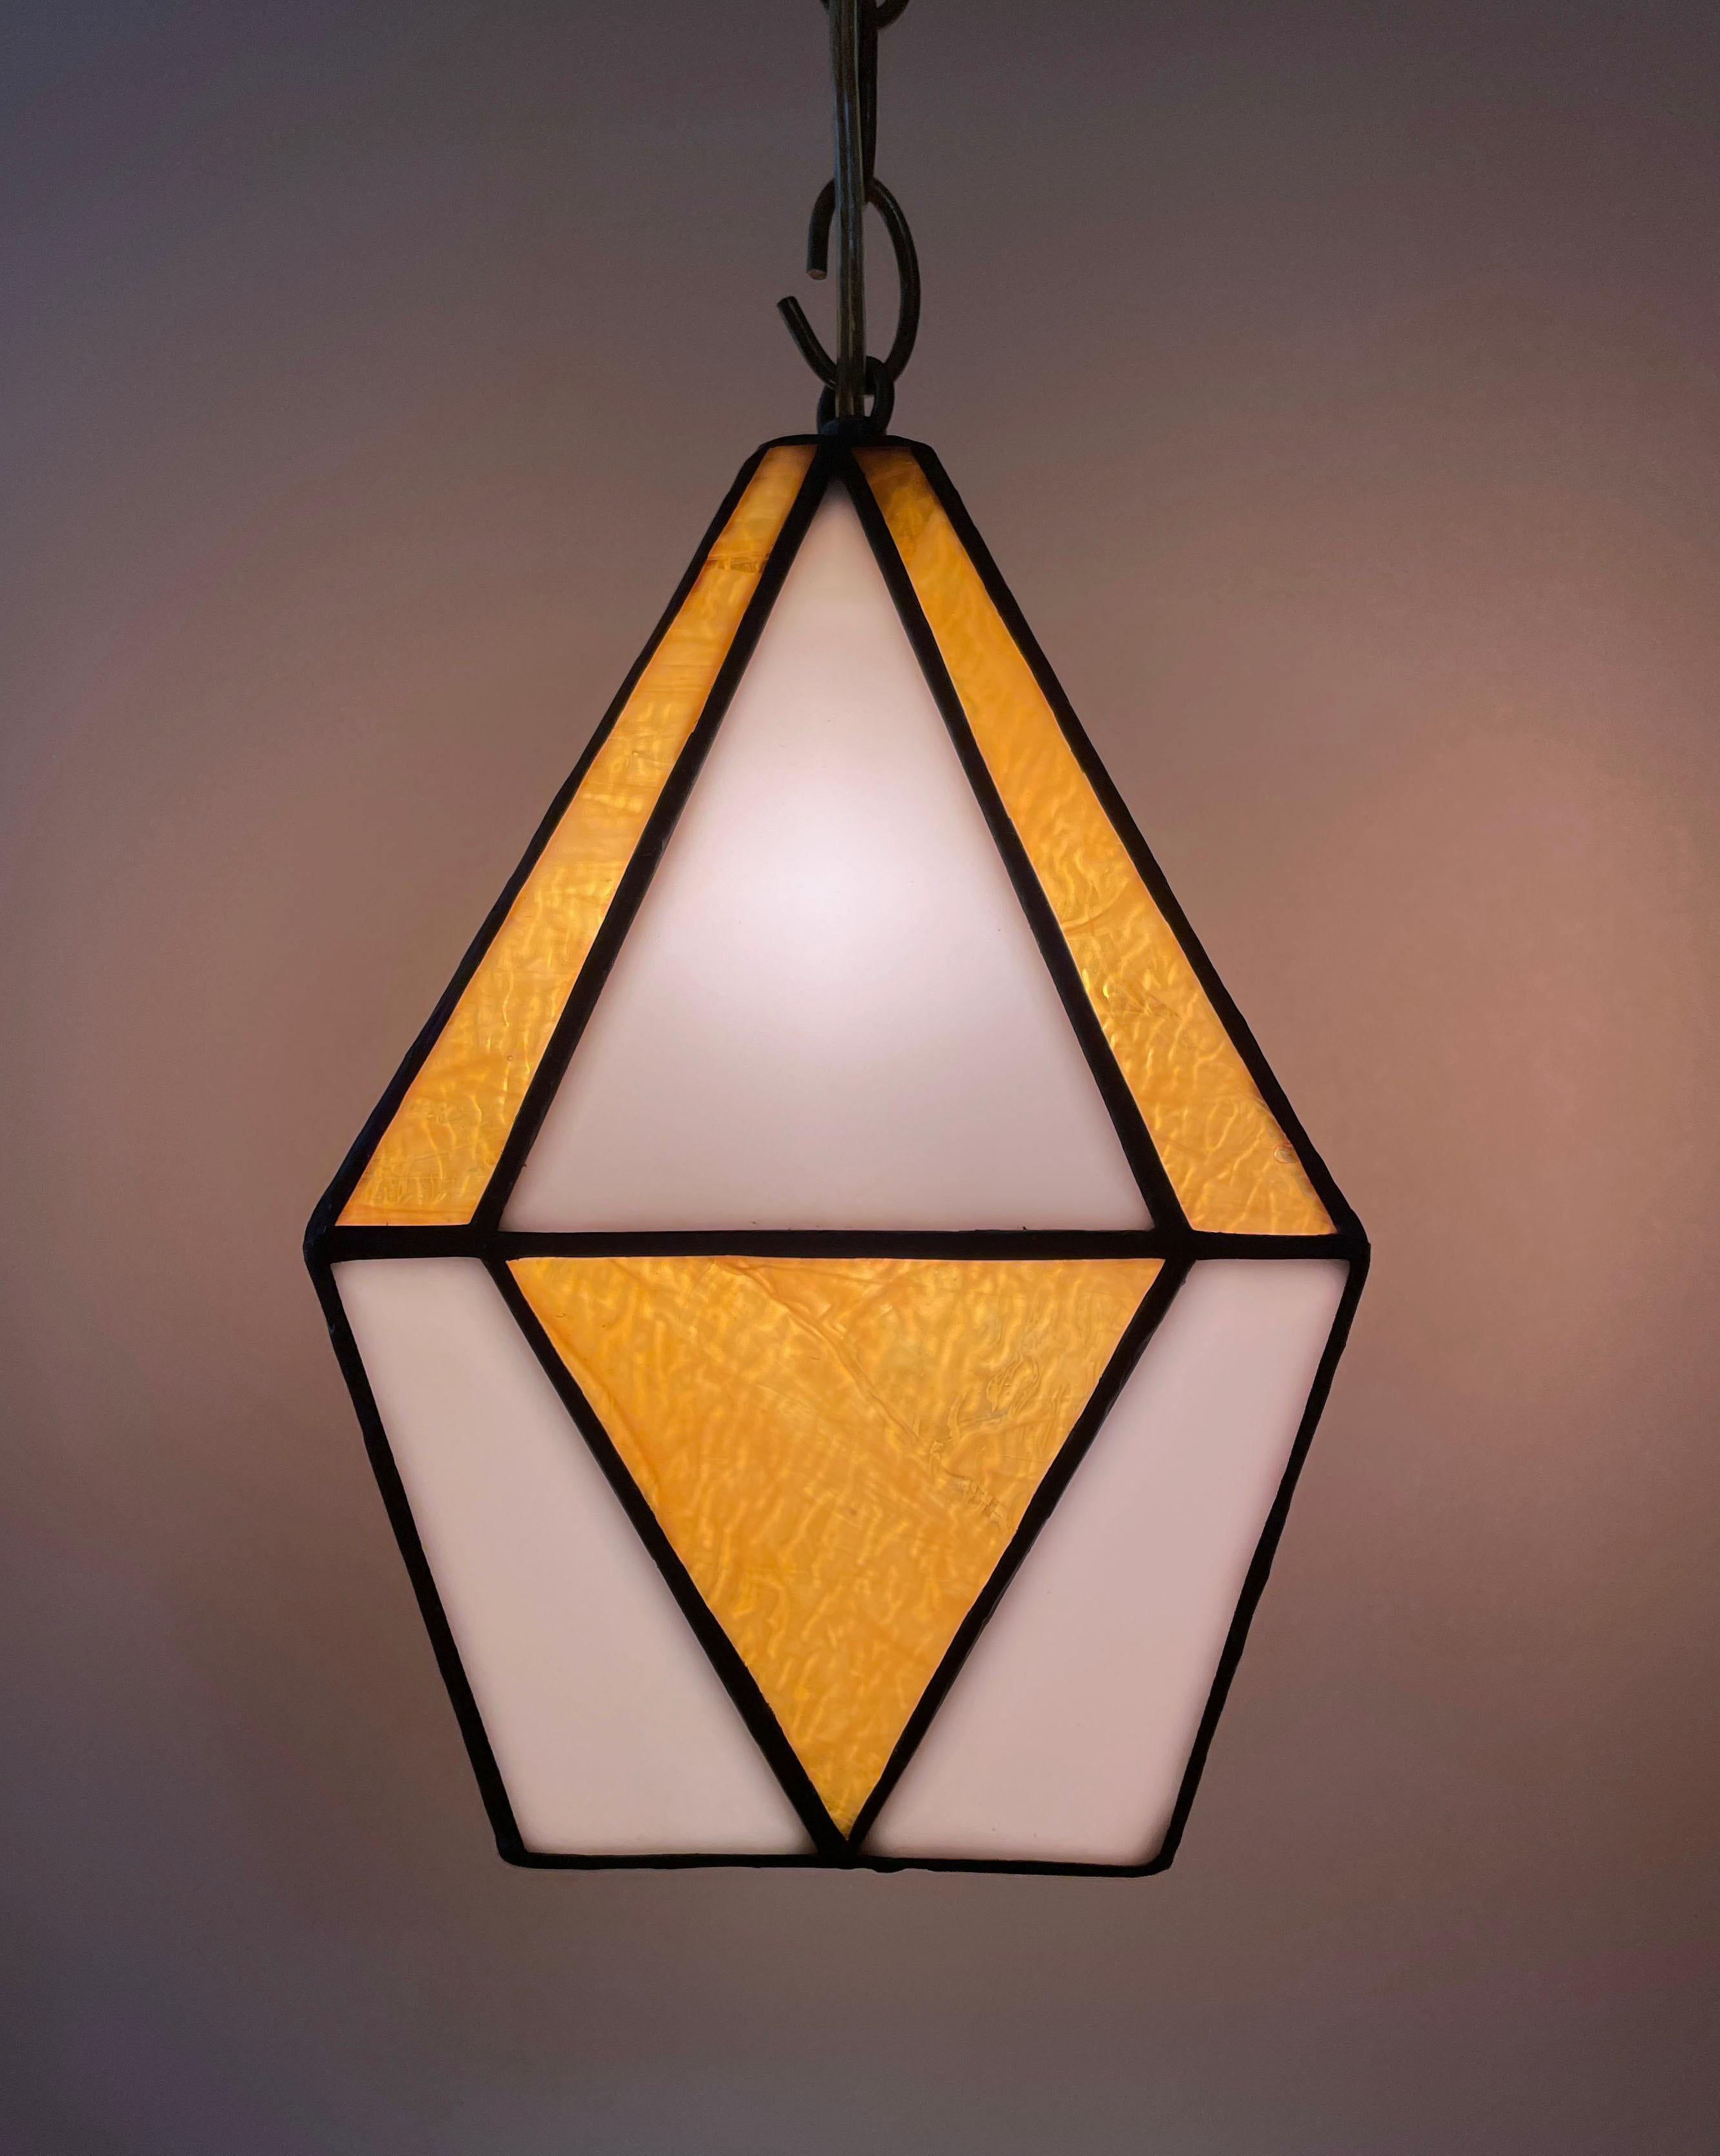 Gold Checkerboard Lantern - Gray Abstract Sculpture by TF Dutchman